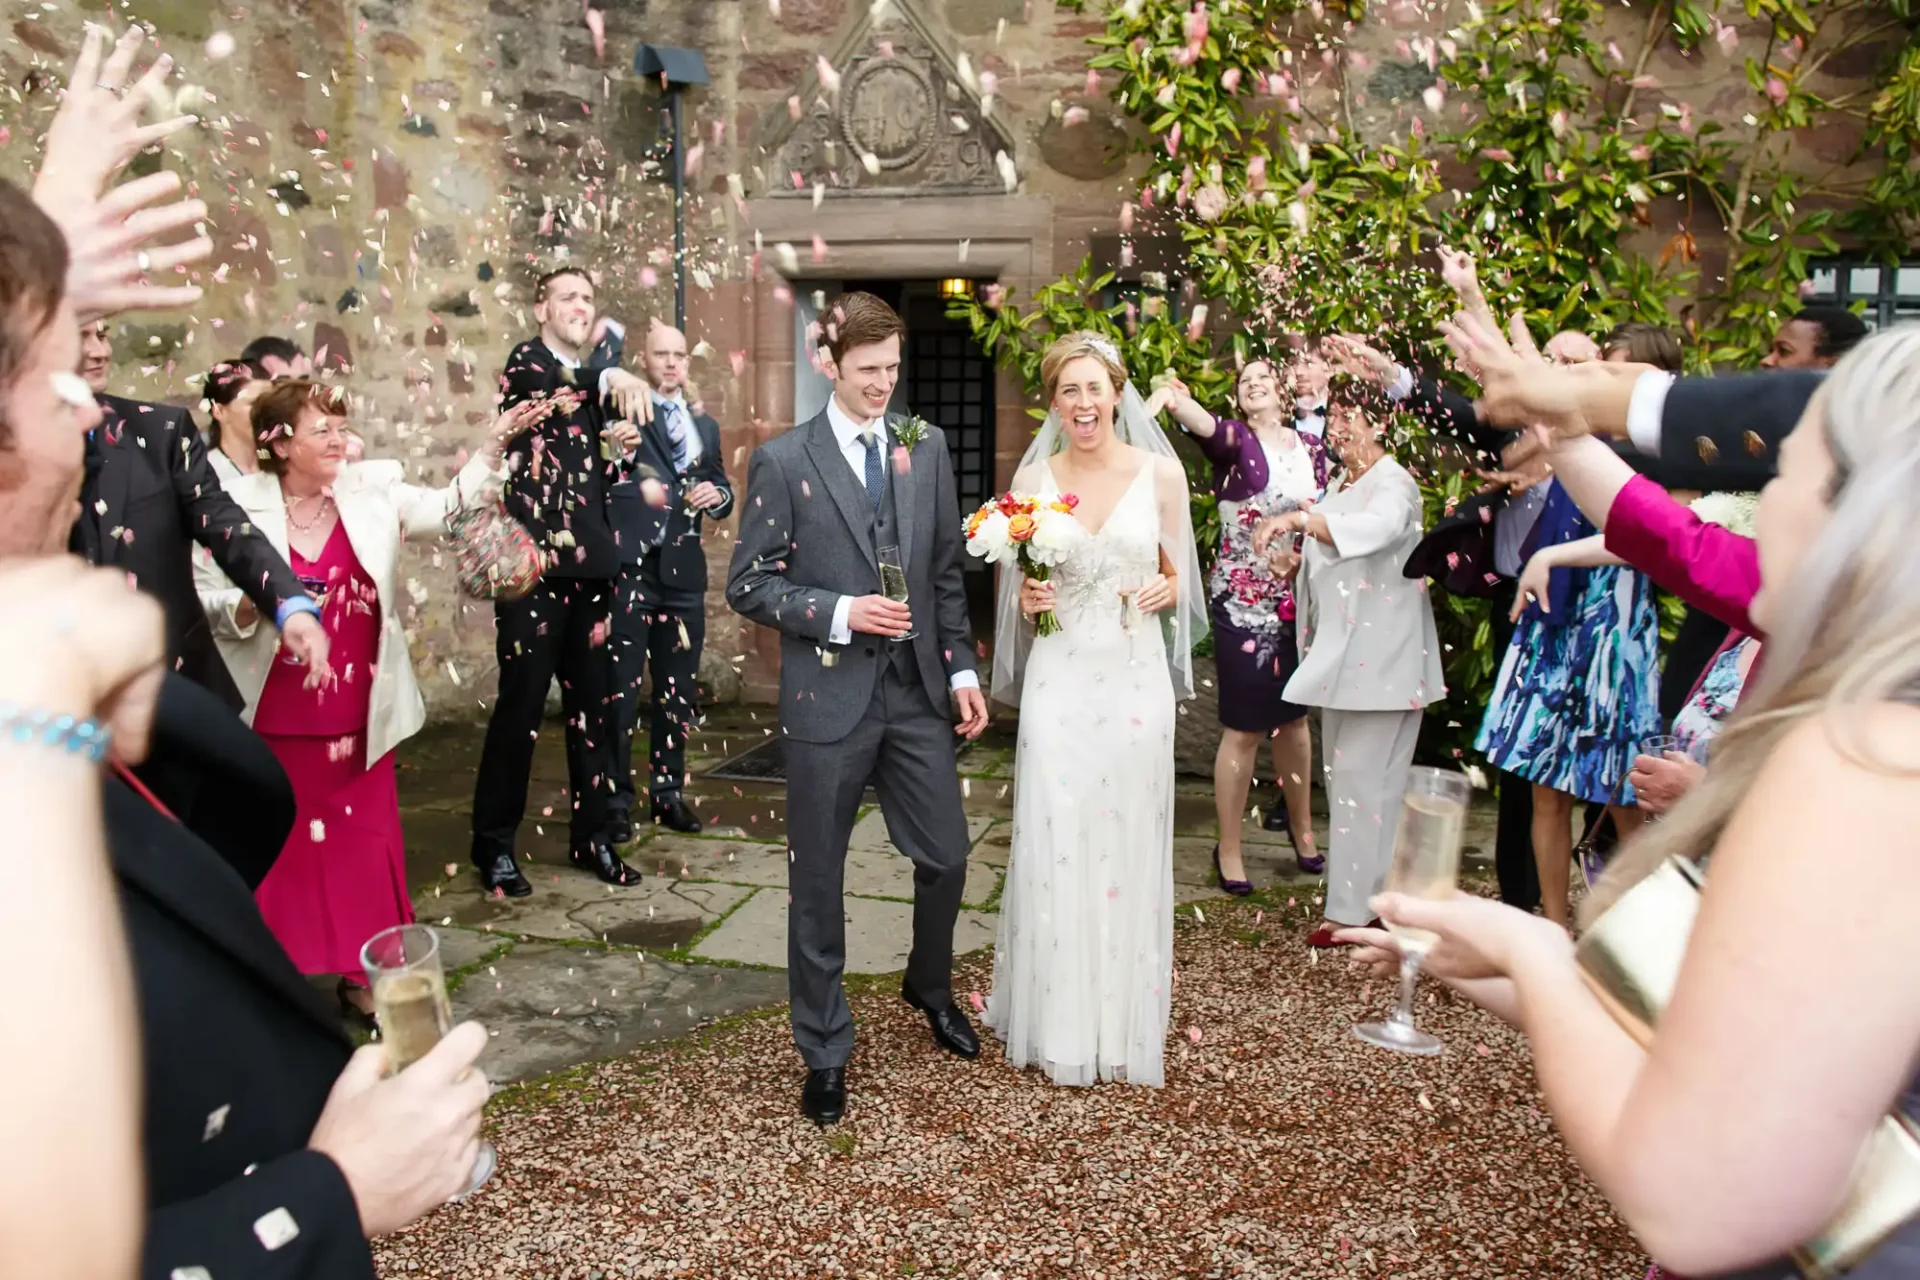 A bride and groom walk joyfully through a confetti shower, surrounded by cheering guests at an outdoor wedding venue.